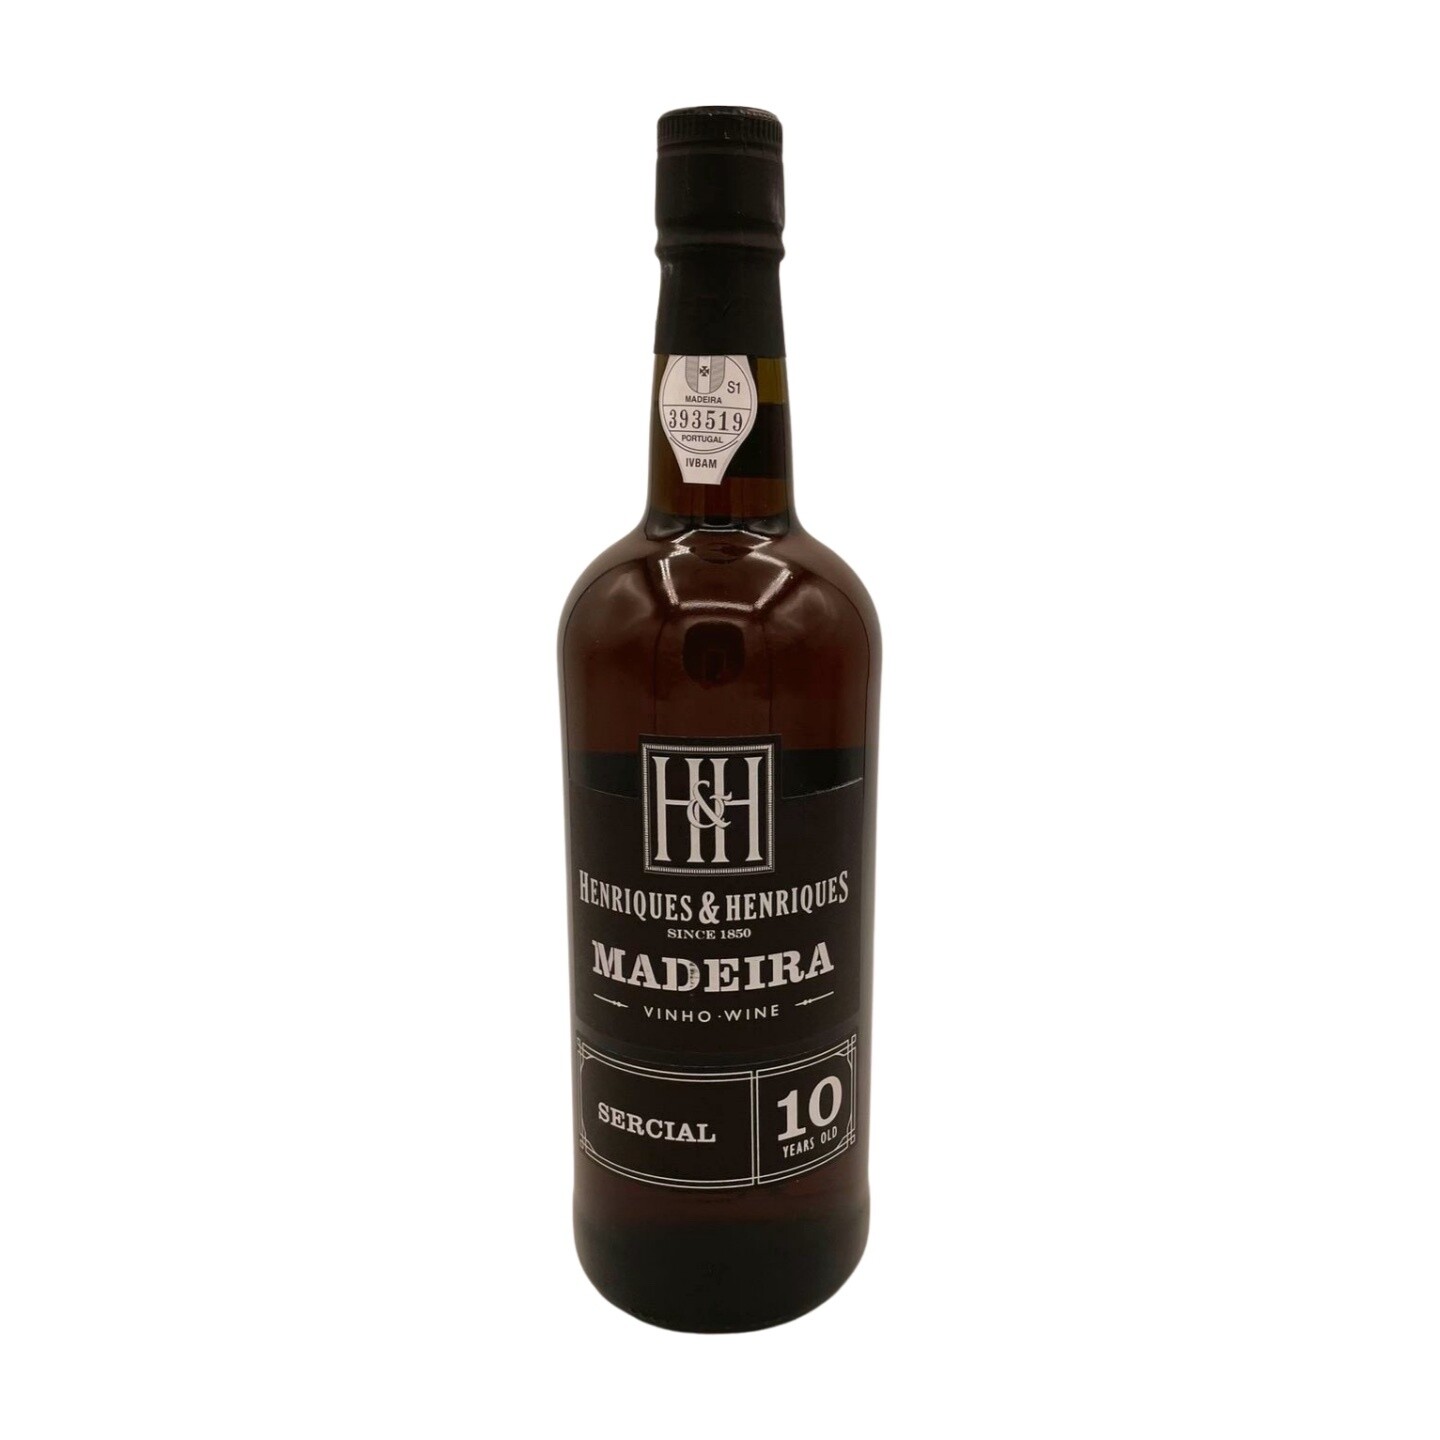 Henriques & Henriques 10 Years Old Boal Madeira